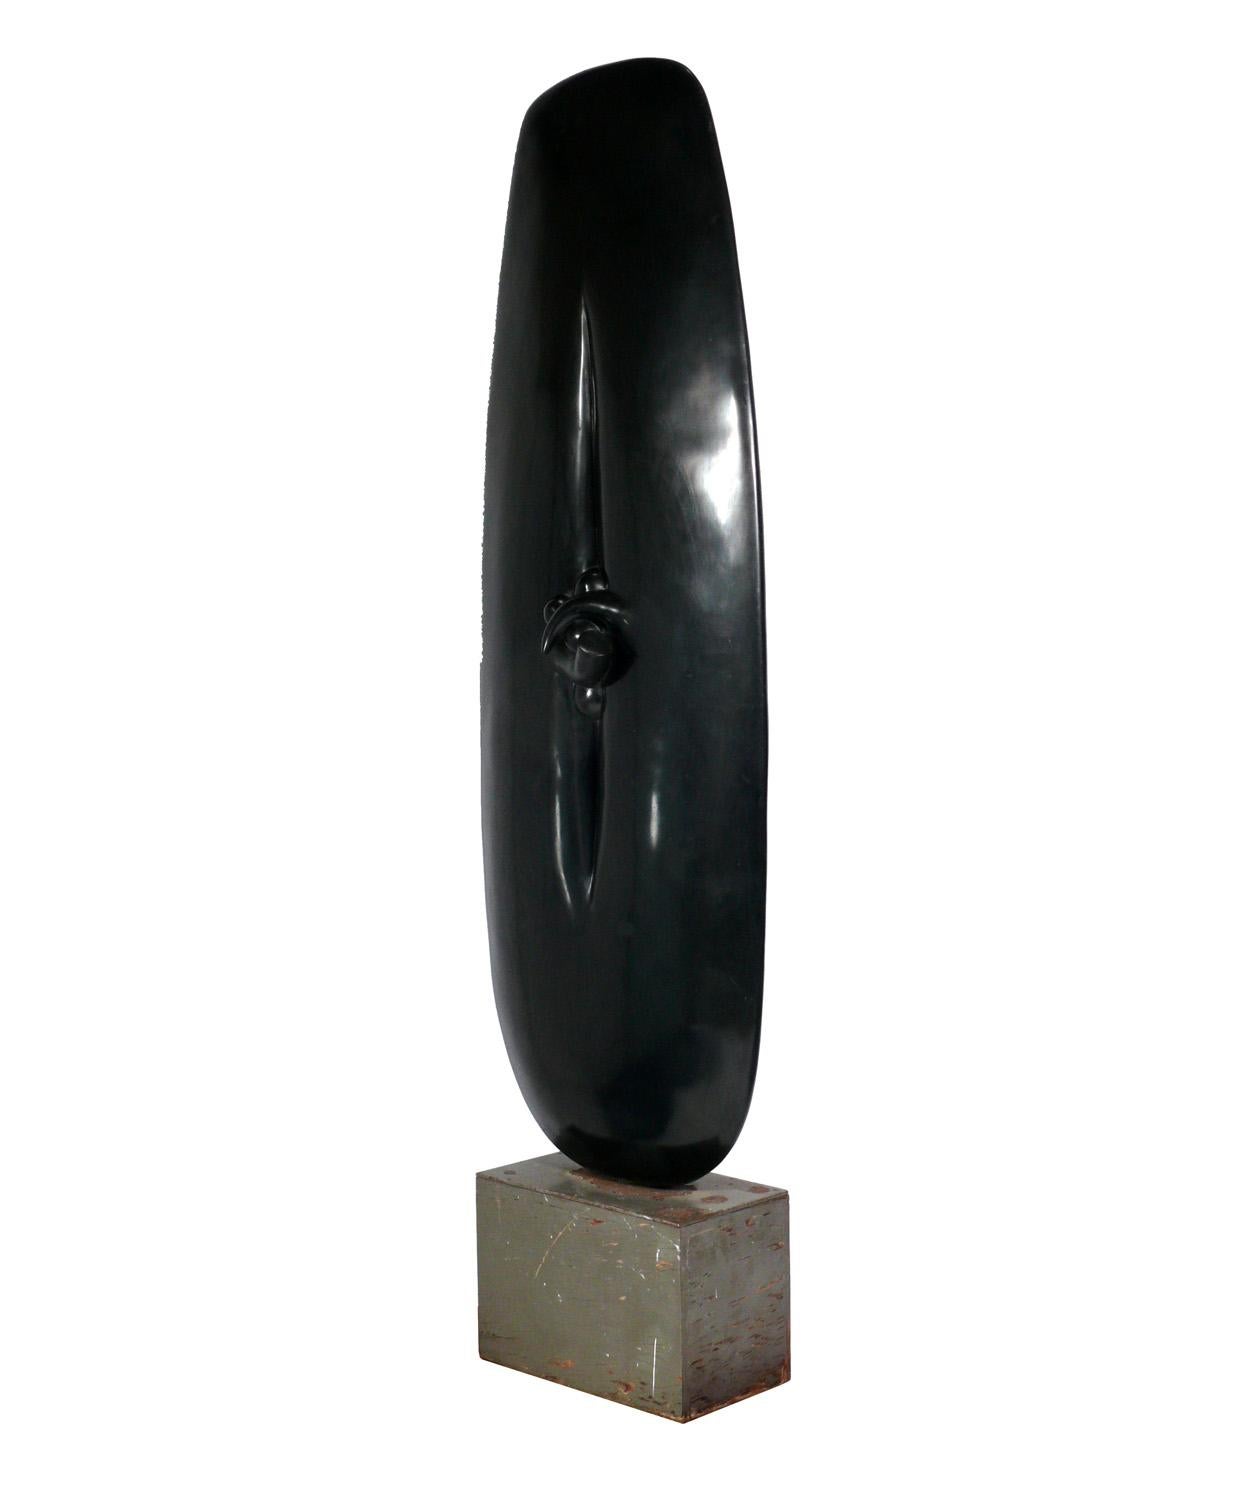 Large scale modern sculpture, purchased from the David Heath Gallery, Atlanta, Georgia, circa 1960s. We have been unable to identify the artist who made this work. It appears to be constructed of fiberglass or resin on a painted plywood base with